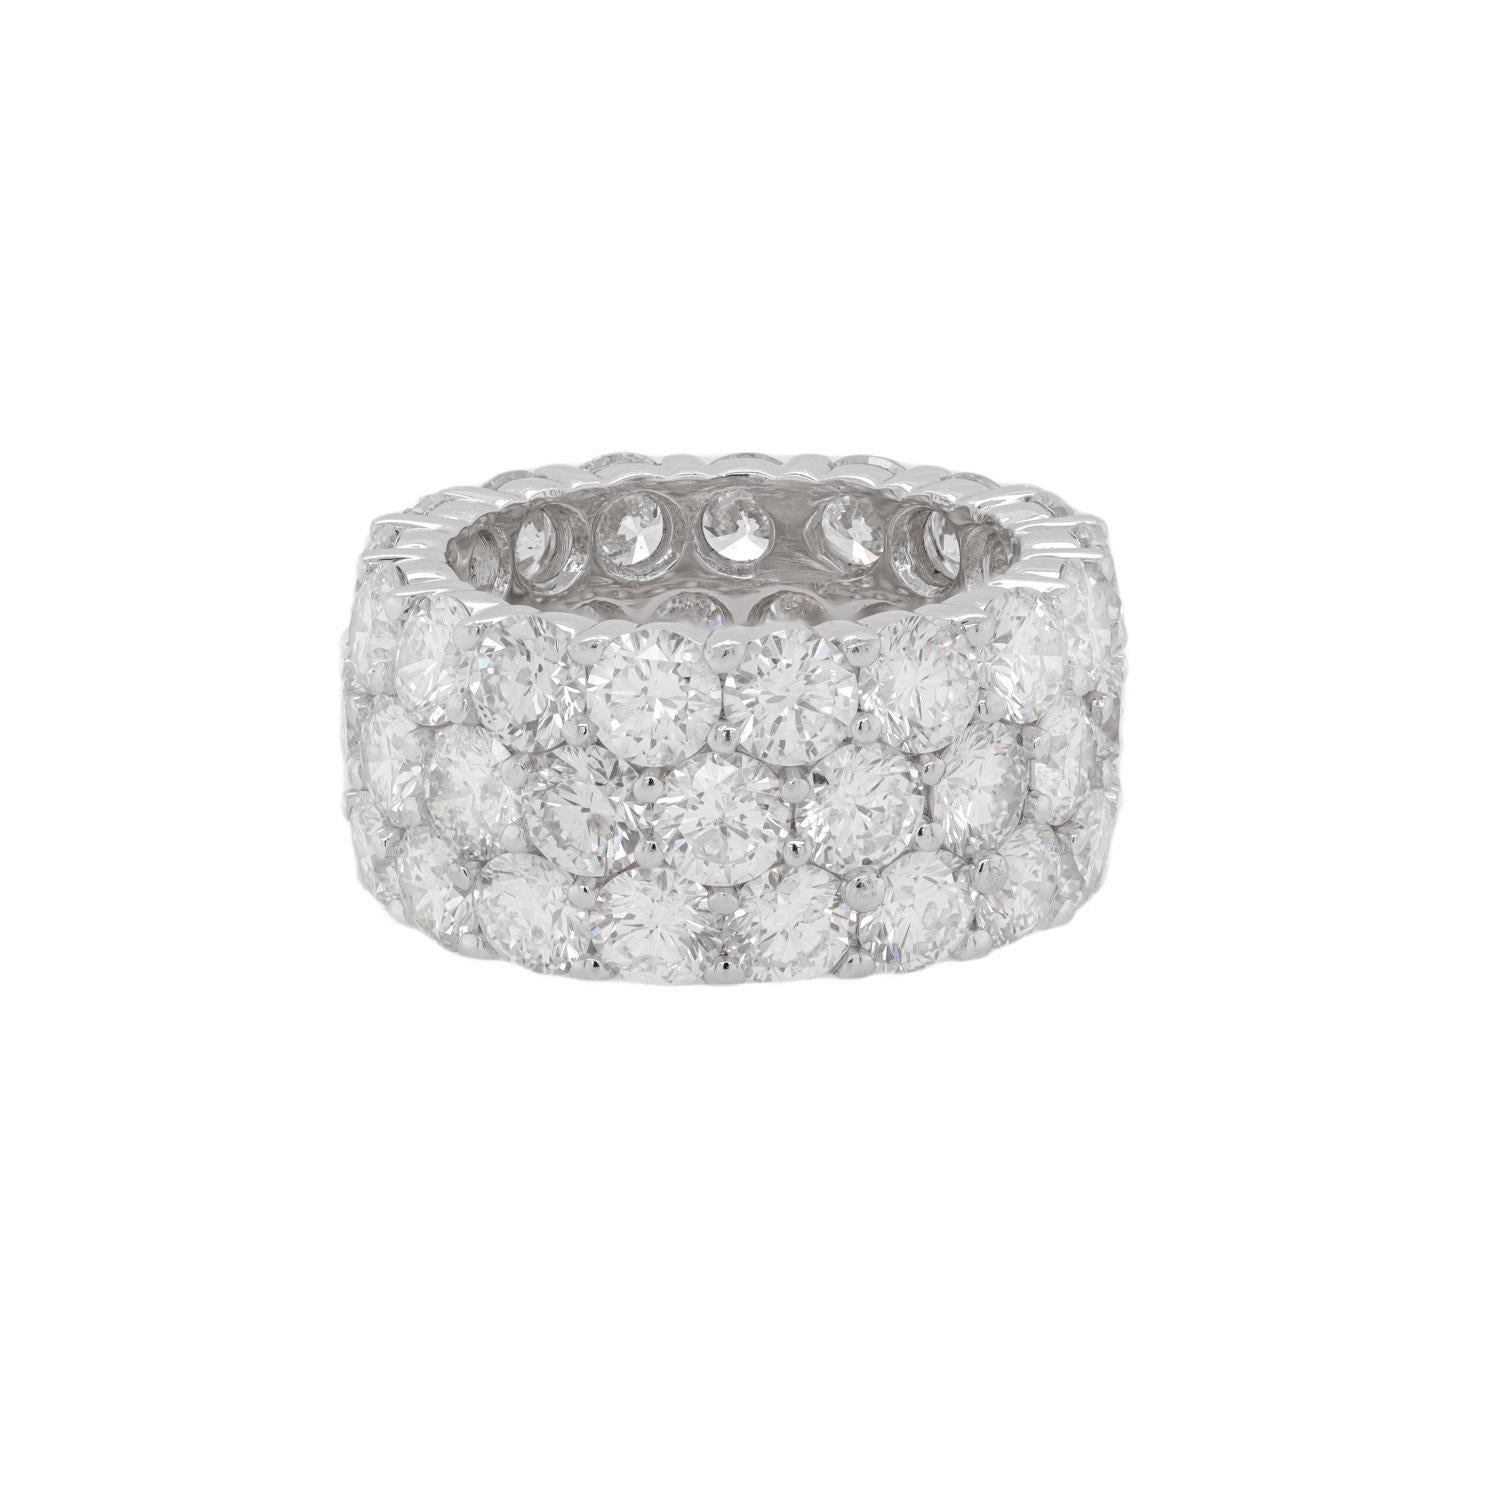 18 kt White Gold Diamond Weddinh eternity band Threee row features 13ct total weight of round diamond.
Diana M. is a leading supplier of top-quality fine jewelry for over 35 years.
Diana M is one-stop shop for all your jewelry shopping, carrying